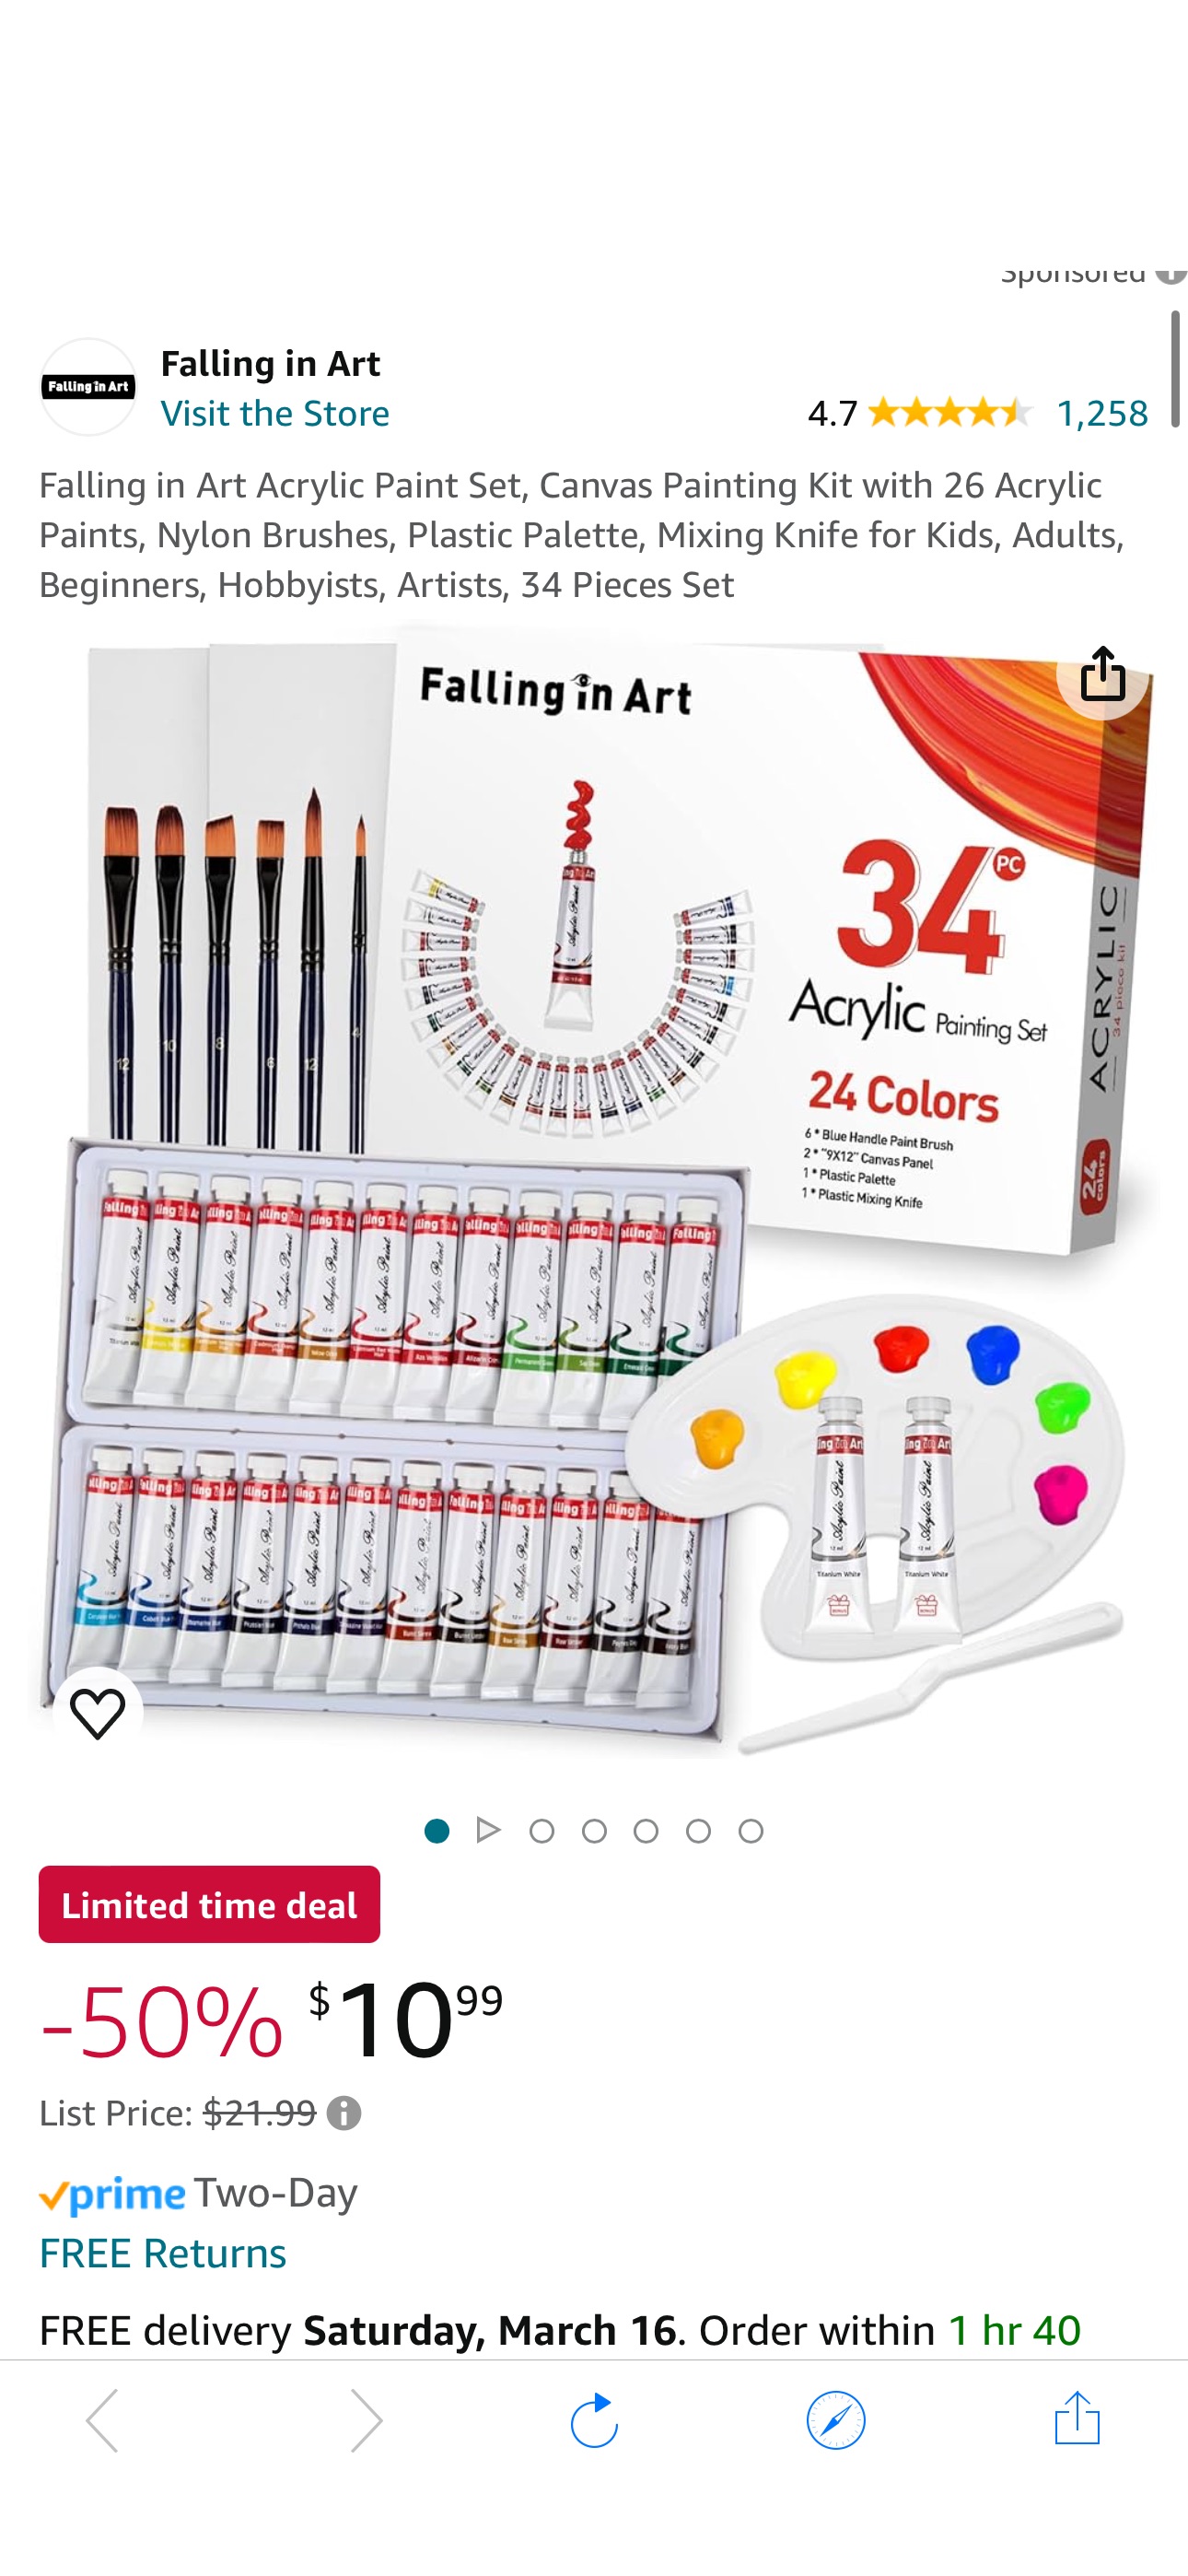 Amazon.com: Falling in Art Acrylic Paint Set, Canvas Painting Kit with 26 Acrylic Paints, Nylon Brushes, Plastic Palette, Mixing Knife for Kids, Adults, Beginners, Hobbyists, Artists, 34 Pieces Set : 